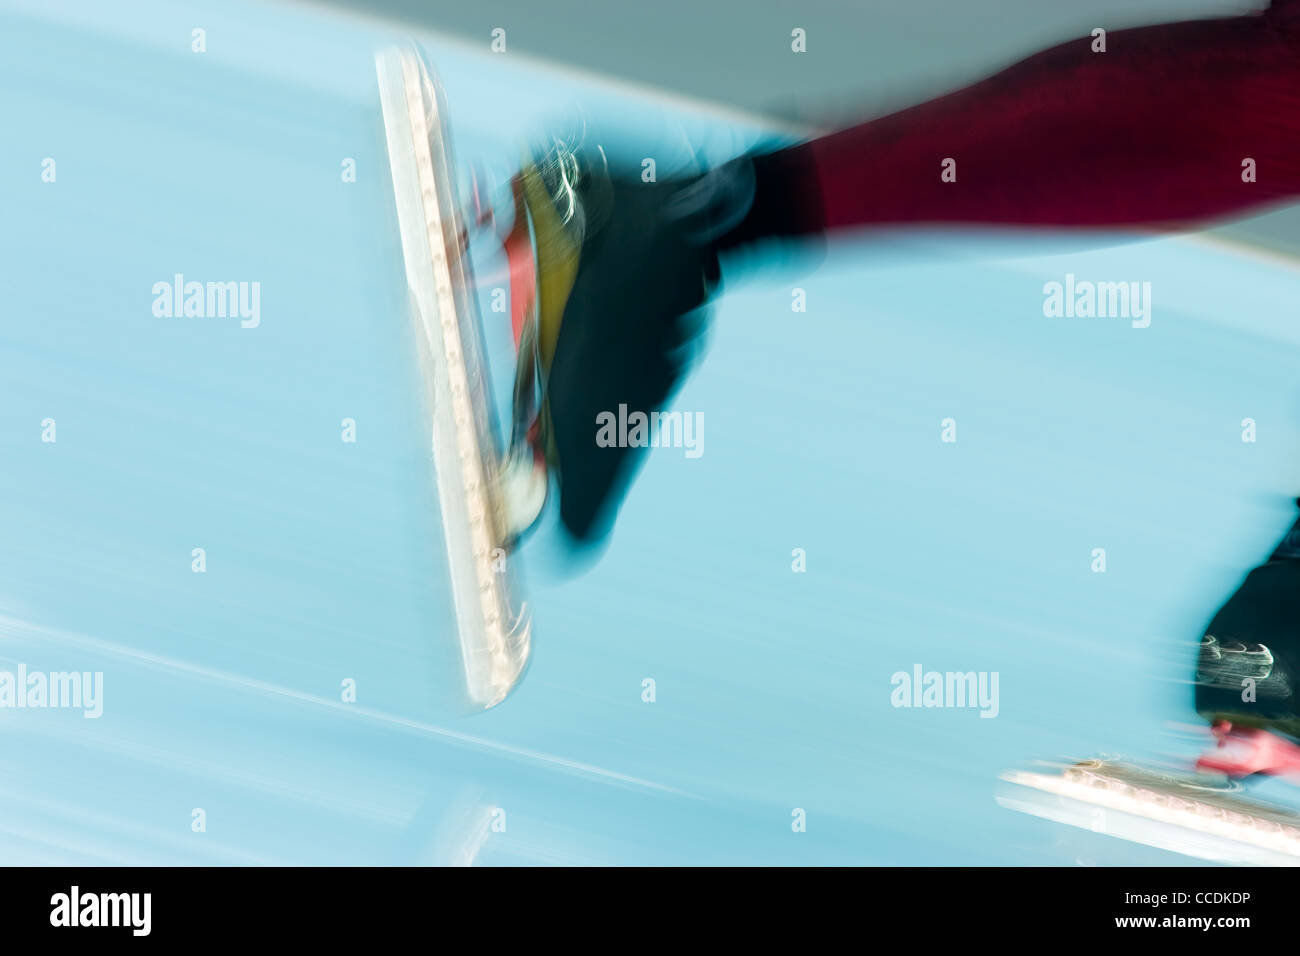 Detail of blurred action of speed skater's feet. Stock Photo